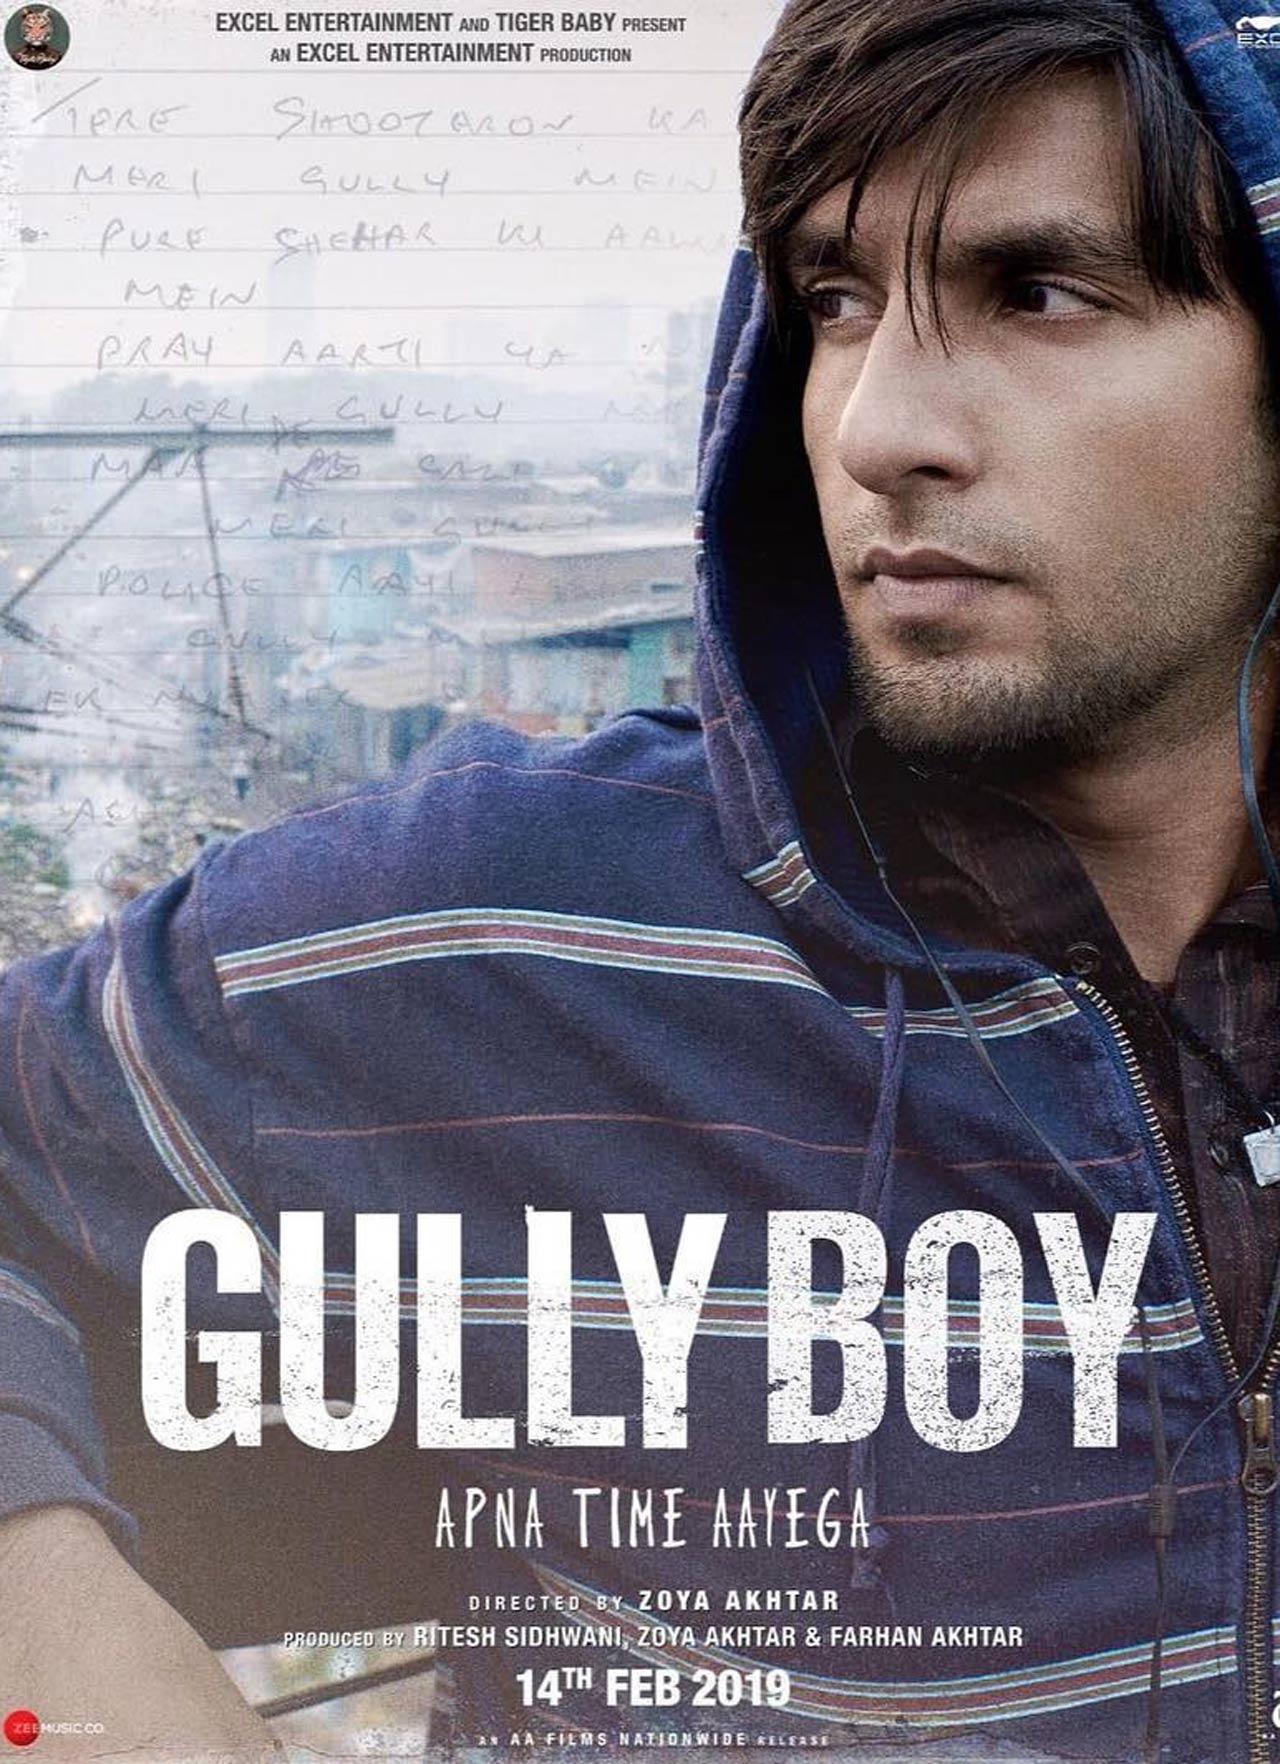 Gully Boy (2019)
Zoya Akhtar can make heroes out of ordinariness. She does that with Murad in this musical drama. When we first see him, he's walking on the streets at midnight with his friend Moeen (Vijay Varma) to steal a car. Moeen leads the theft and Murad follows. Till this moment, Murad is a common man who has aims, ambitions, but no means. He's a victim of fate and circumstances but it's his passion for music that drives him towards something extraordinary. Rap becomes his means of communication and music his reason to live. A common man transforms into a hero, but someone who's one of us. A hero who's aiming for the skies but firmly attached to his roots. The title was a giveaway already. 